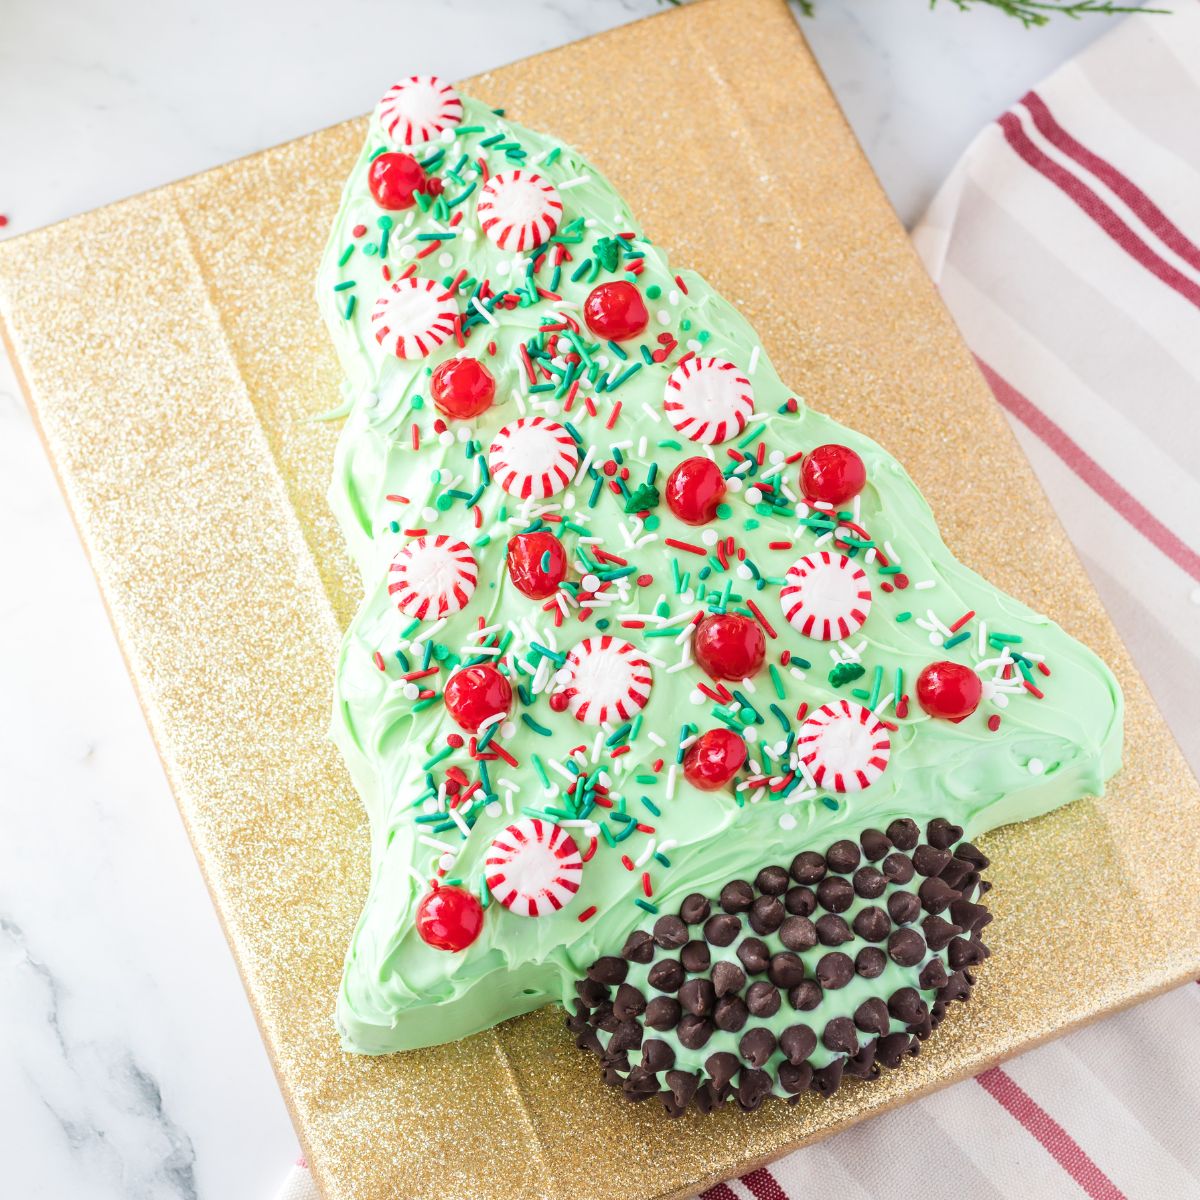 https://www.southerncravings.com/wp-content/uploads/2022/10/Christmas-Tree-Cake-Featured-Image.jpg